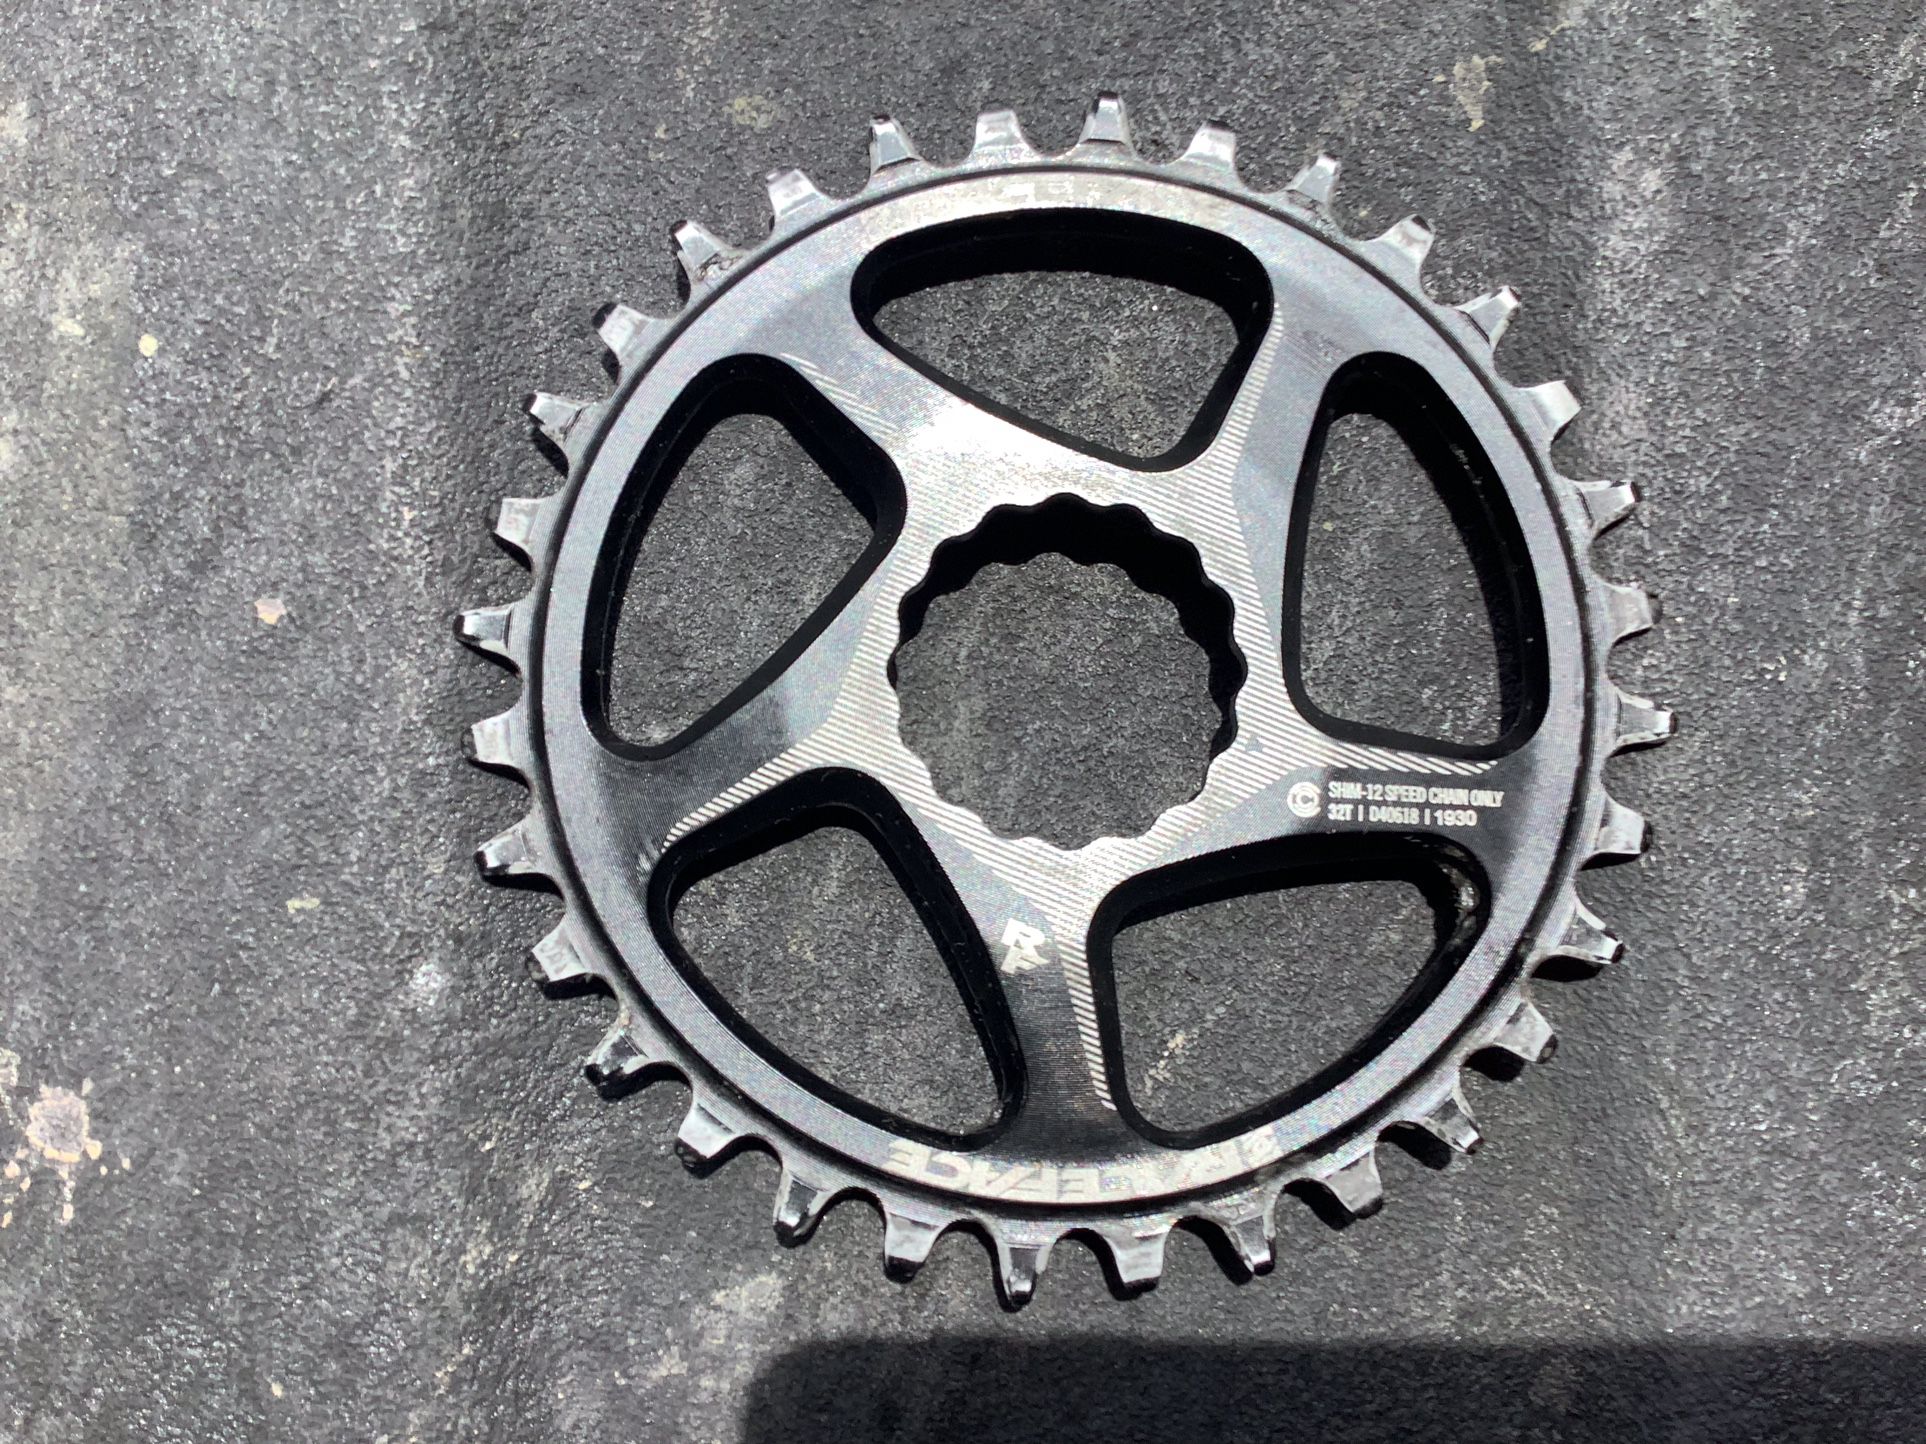 Raceface 32 tooth Cinch chainring